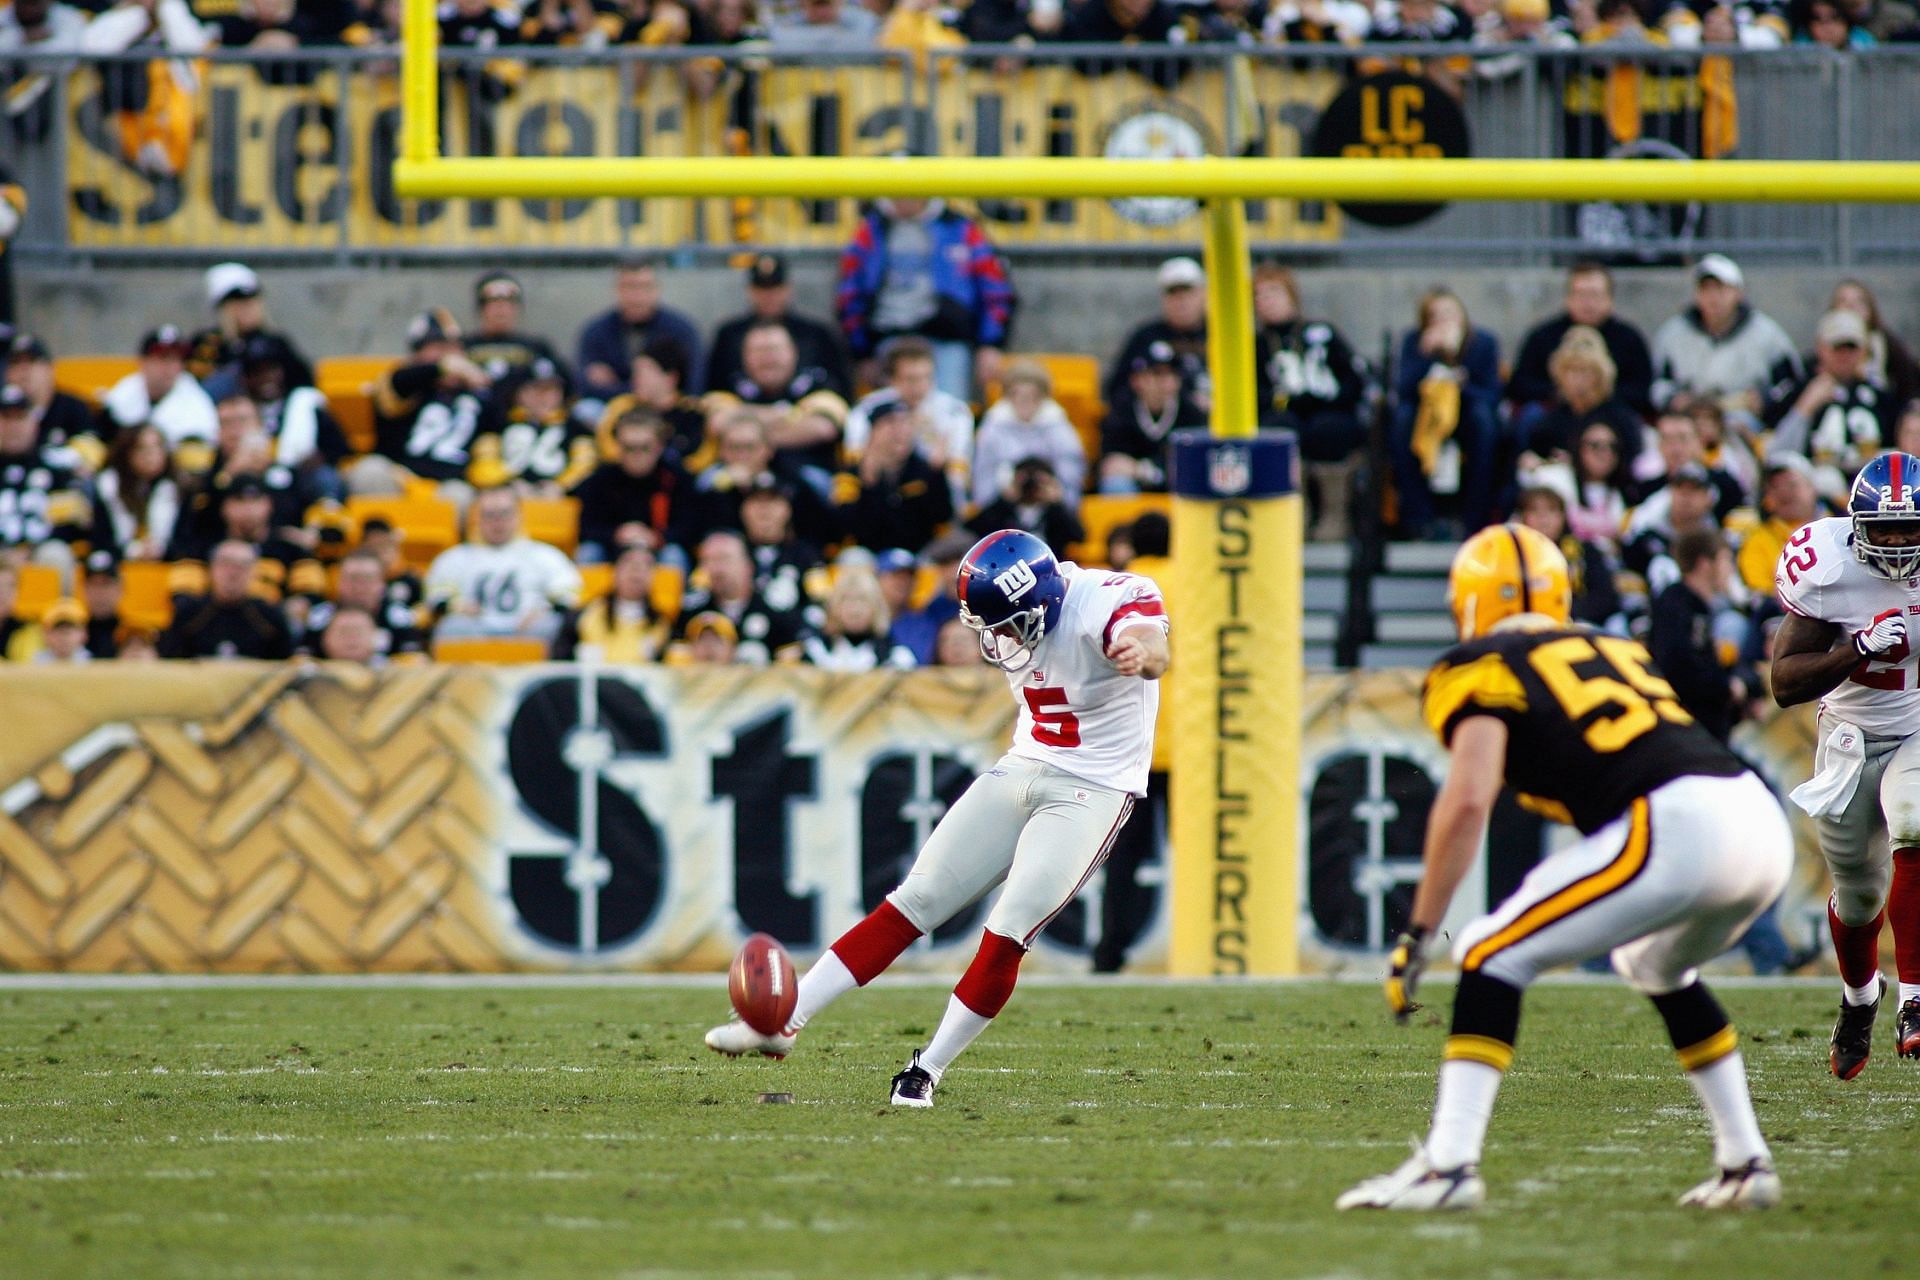 Carney launches a kickoff in 2008 as a member of the New York Giants (Photo: Getty)